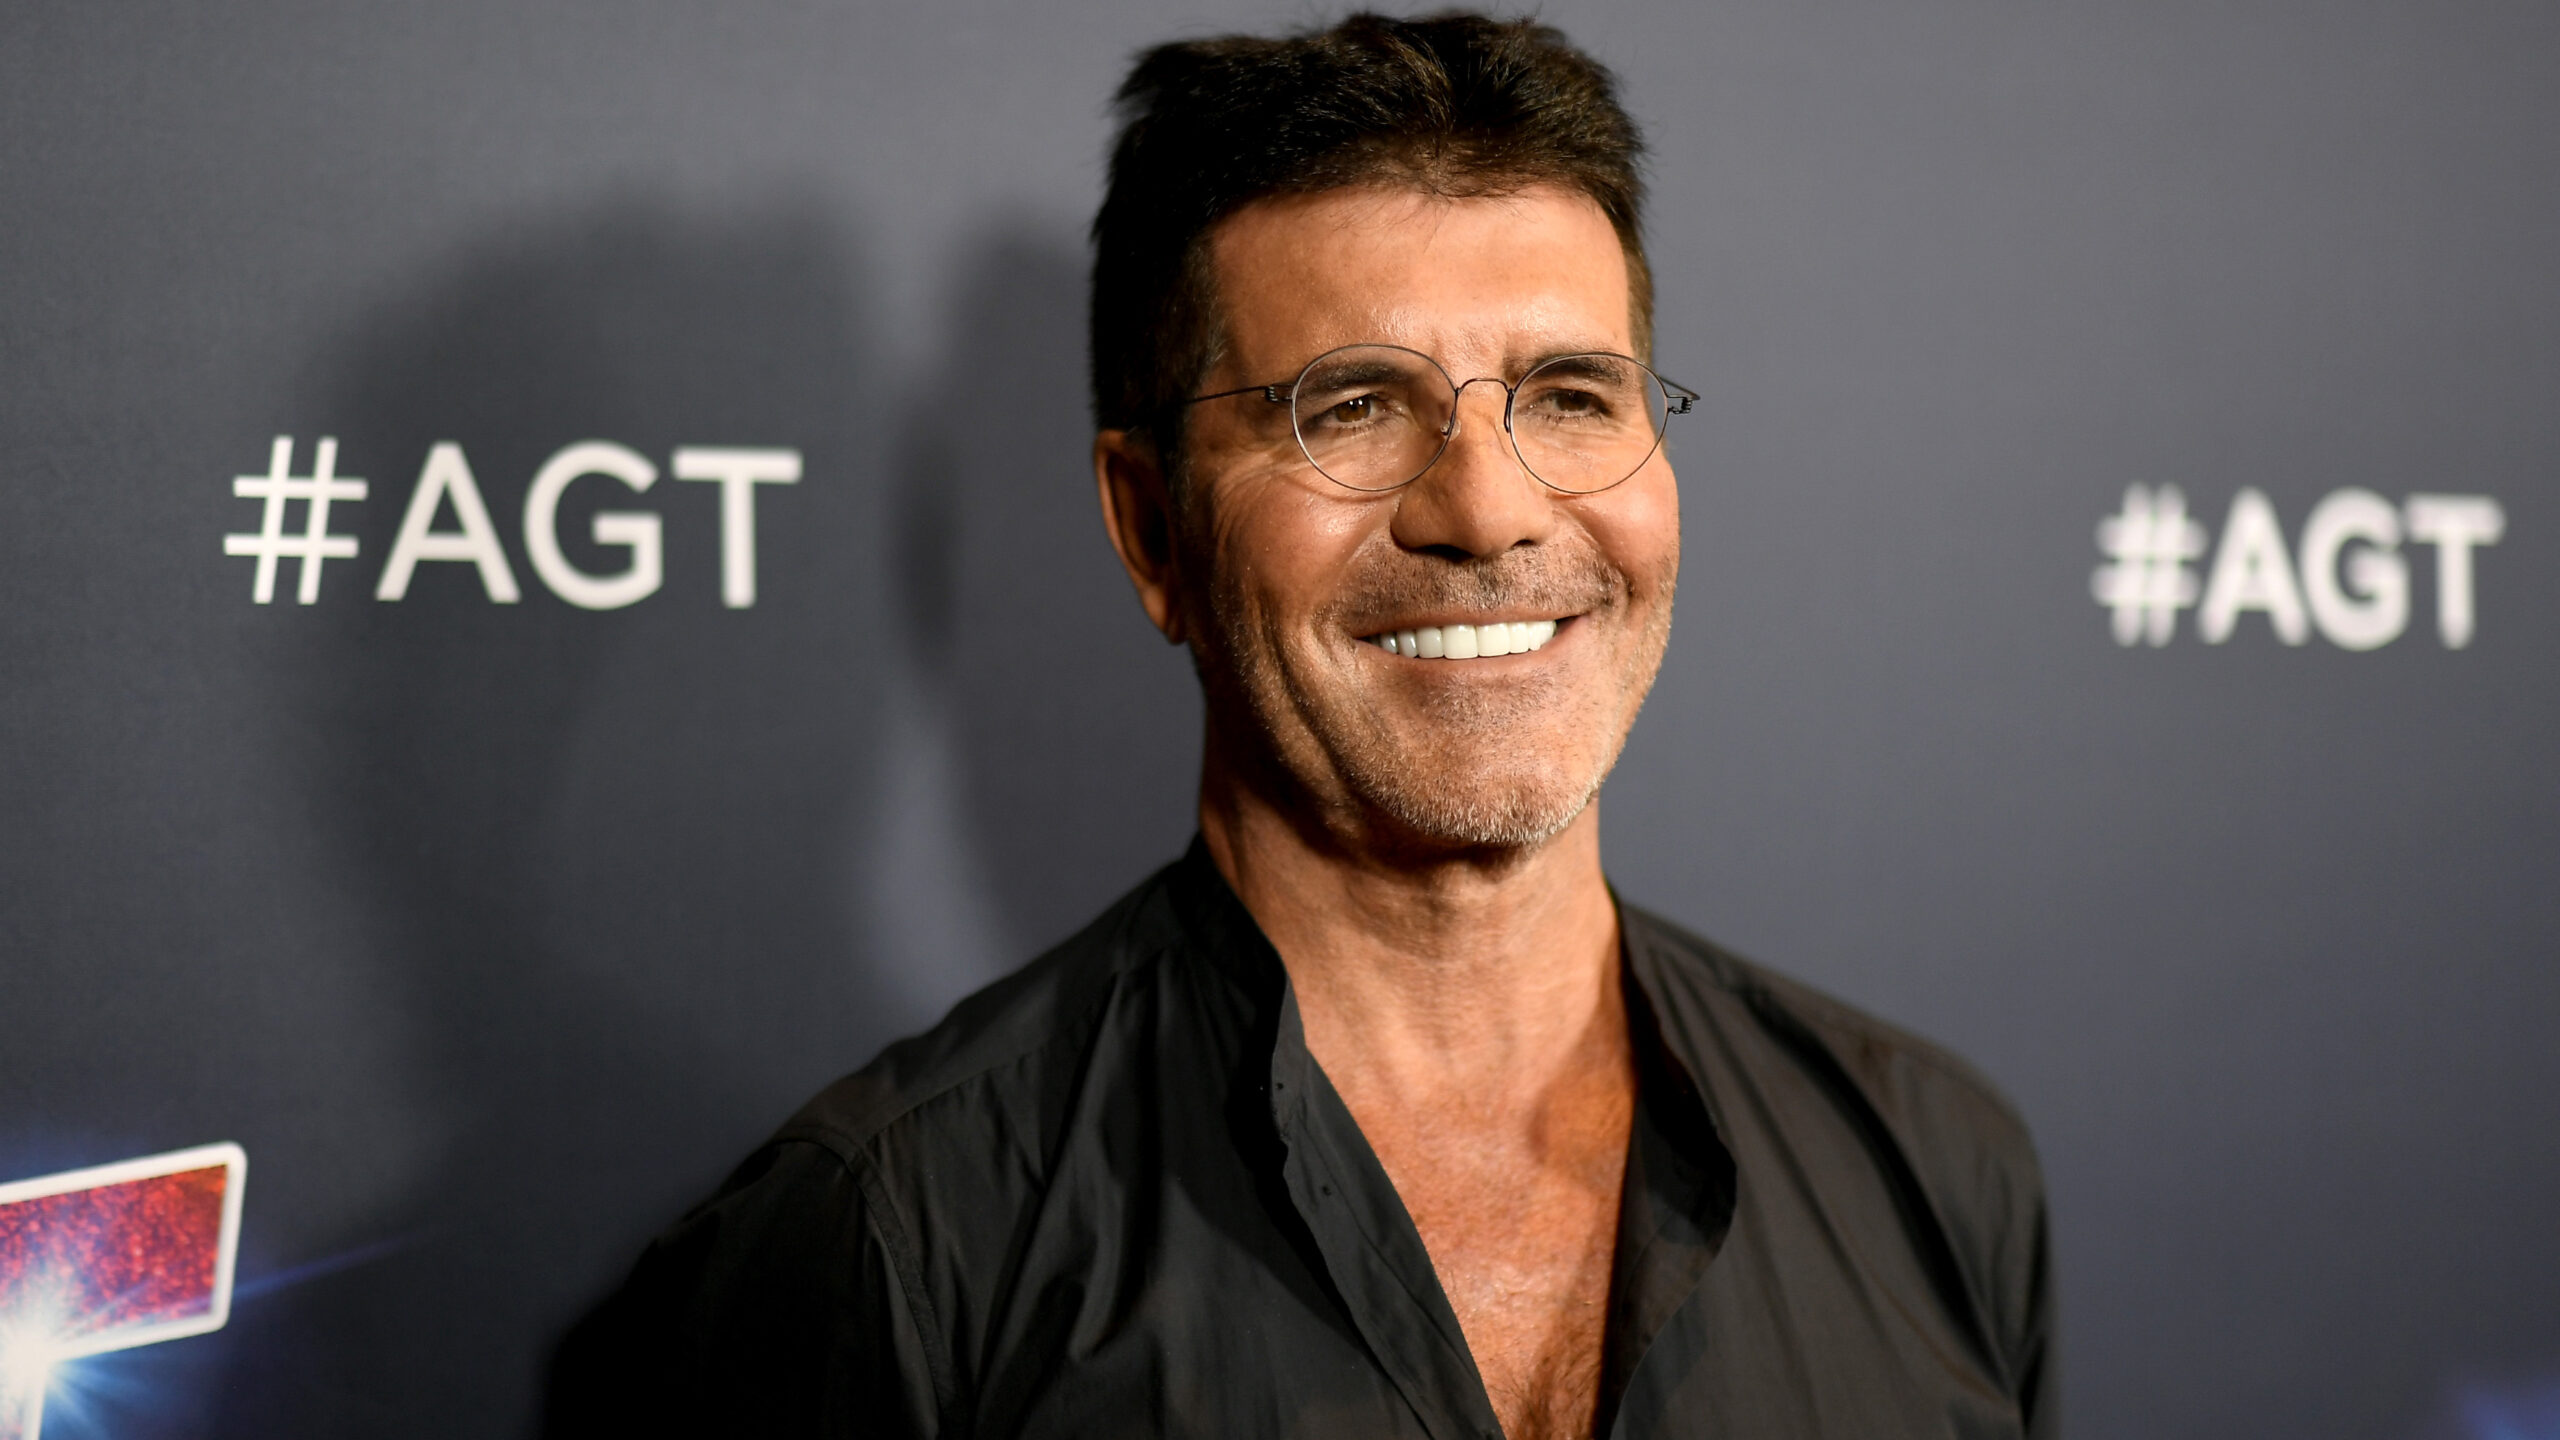 Simon Cowell says his child helped him overcome grief following the deaths of his parents